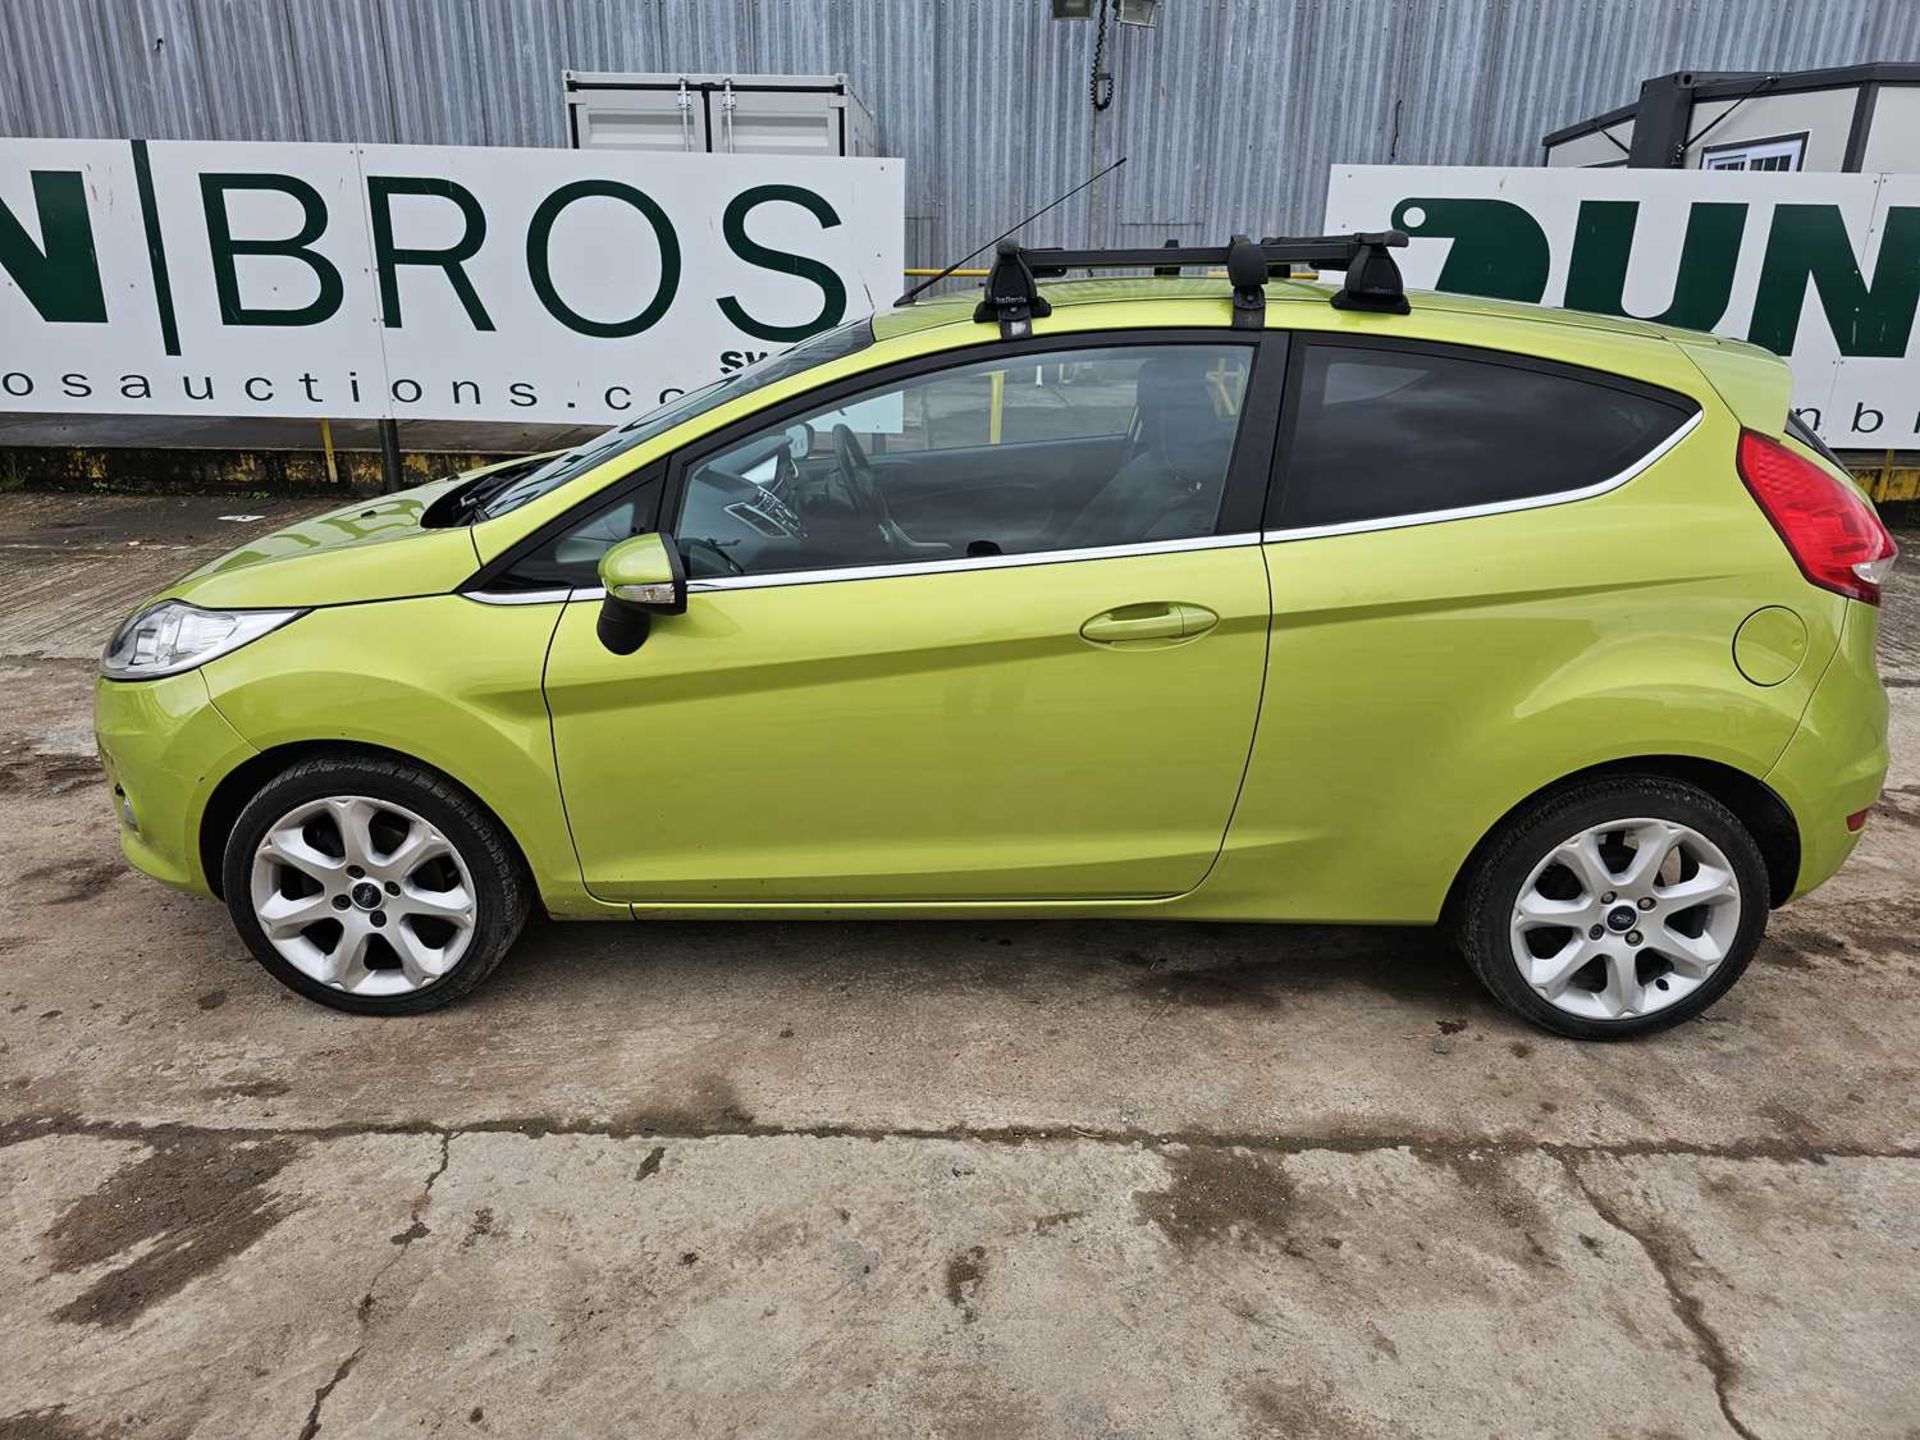 2010 Ford Fiesta Titanium, 5 Speed, Cruise Control, A/C (Reg. Docs. & Service History Available) - Image 2 of 25